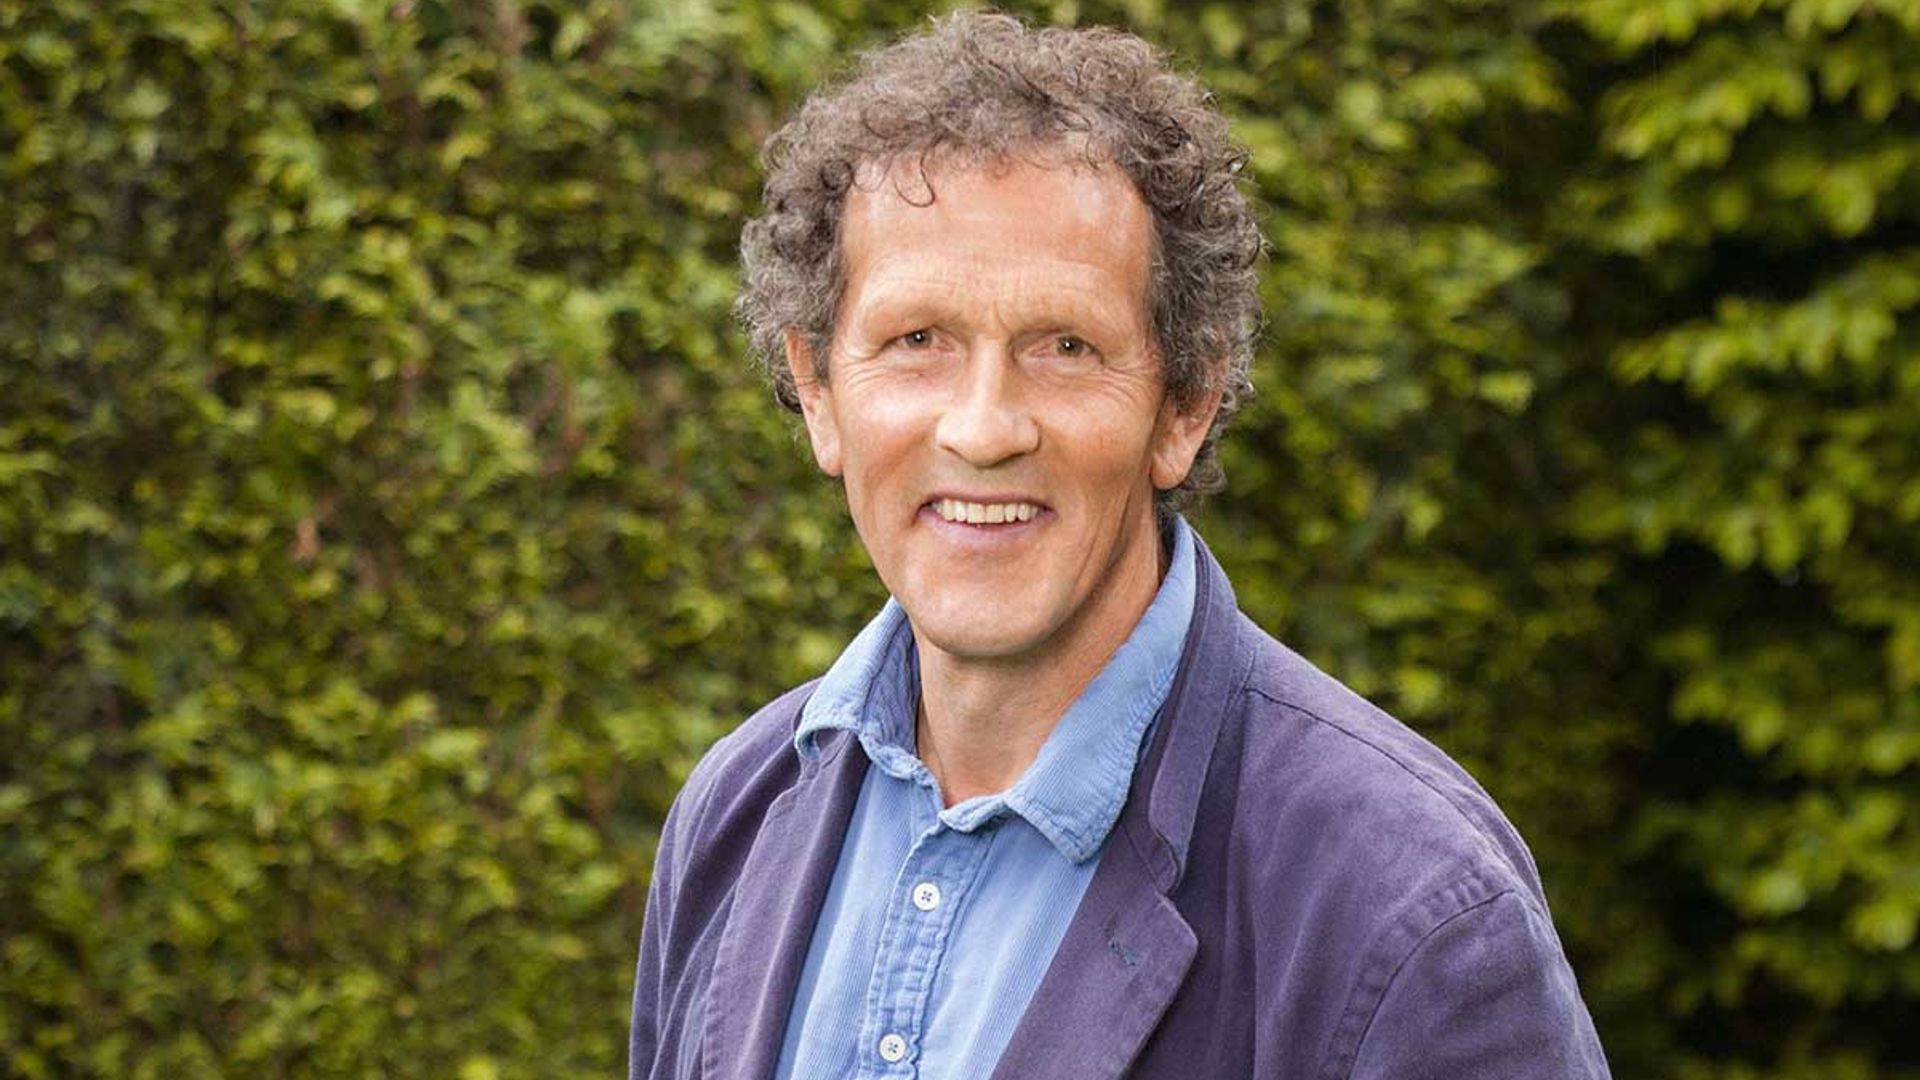 monty don facts